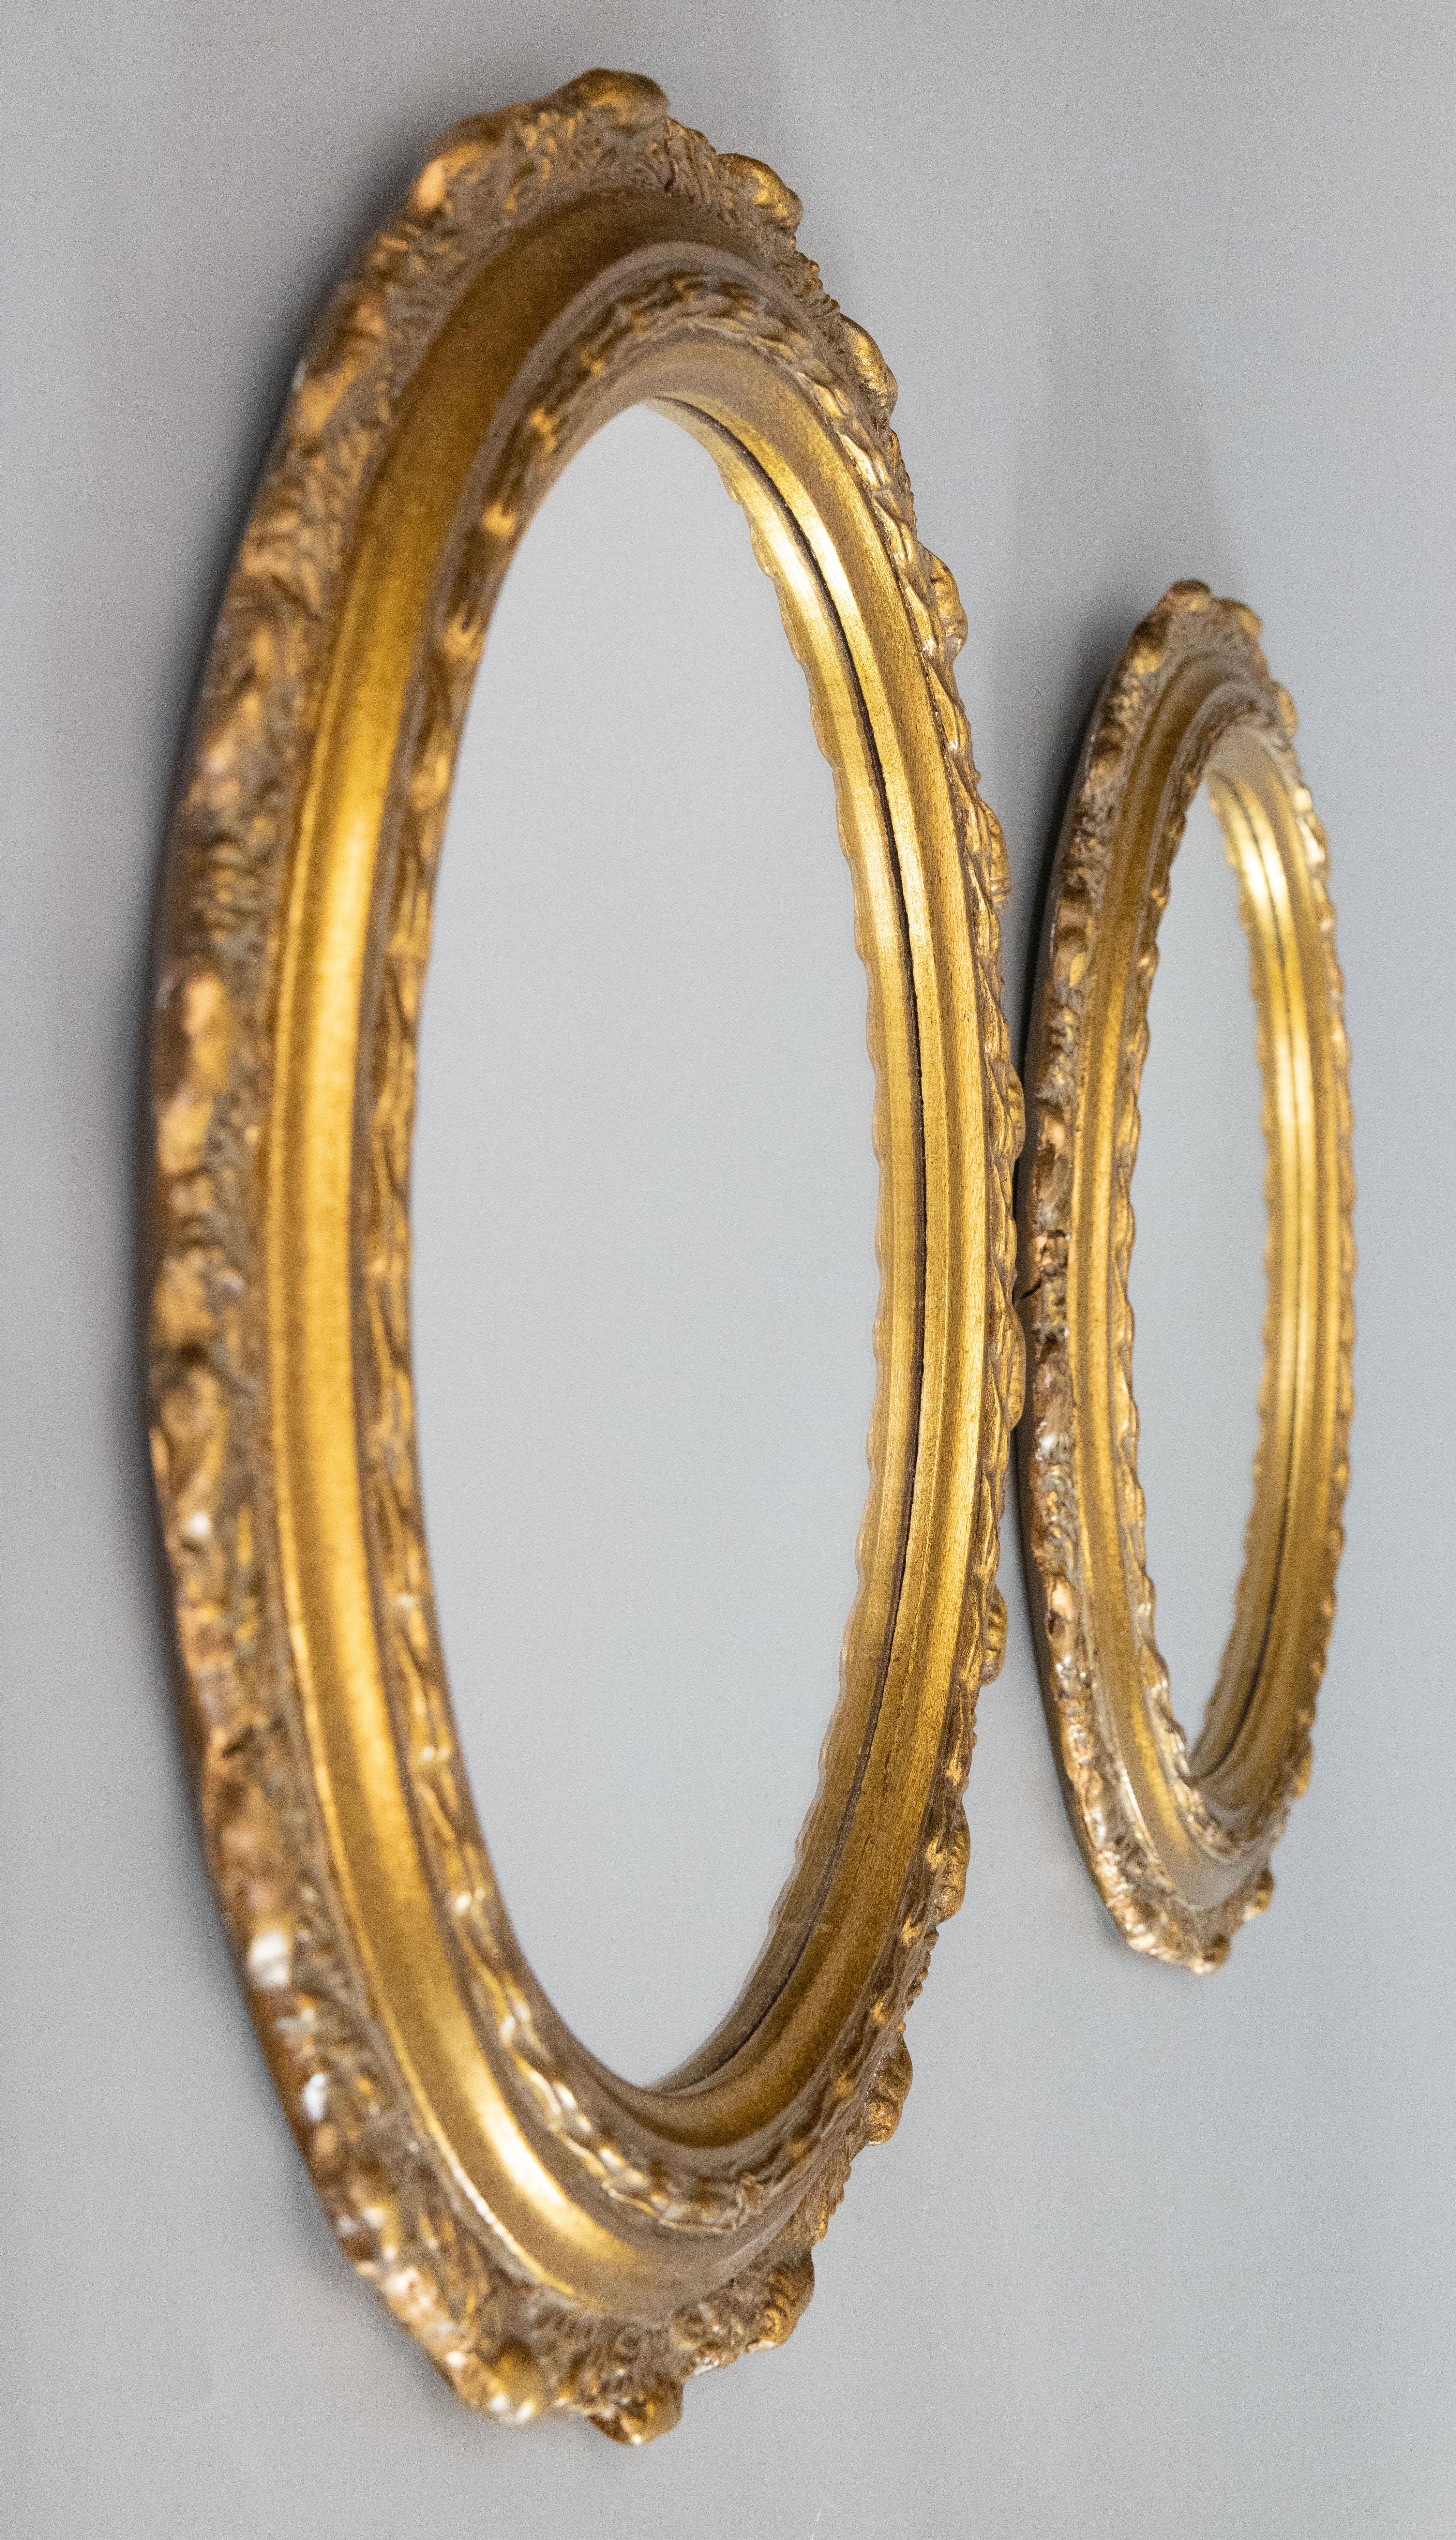 Pair of Mid-Century Italian Giltwood and Gesso Oval Mirrors, circa 1950 For Sale 1